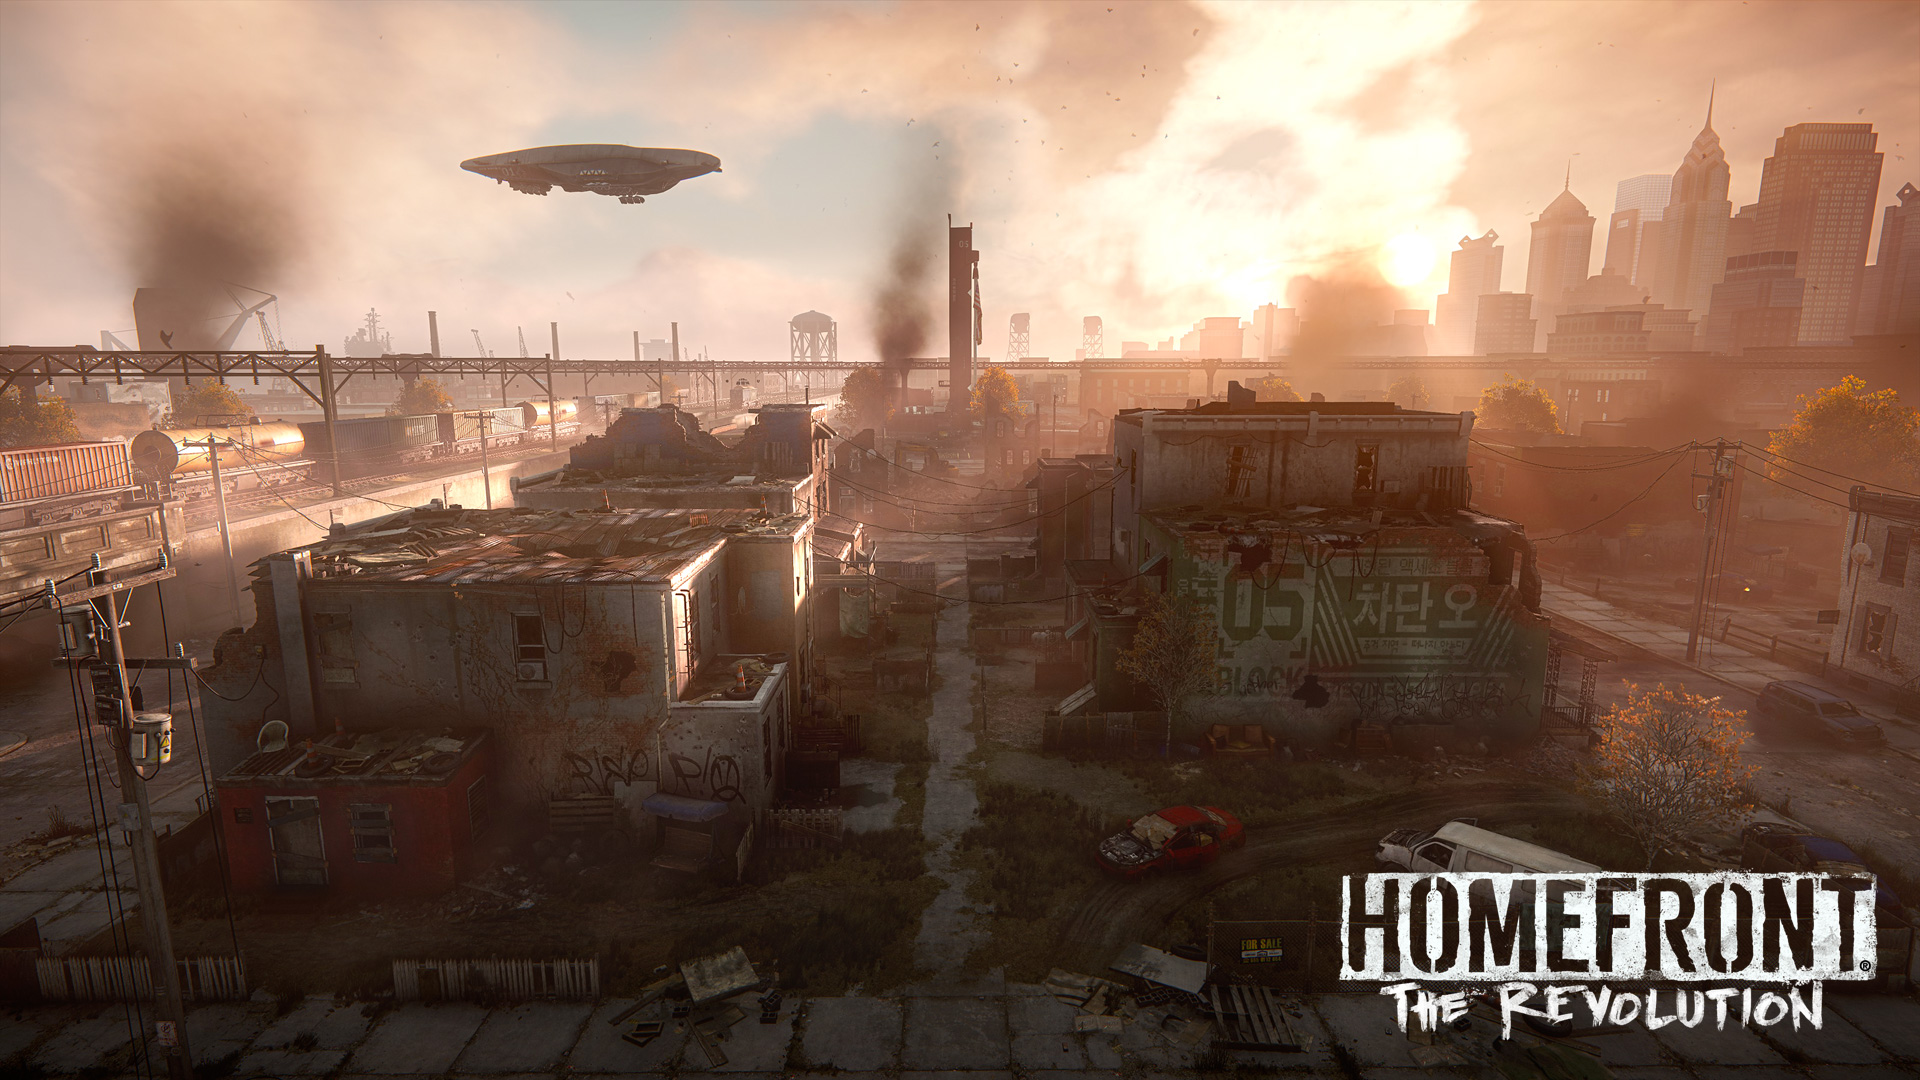 Media asset in full size related to 3dfxzone.it news item entitled as follows: Deep Silver: slitta il rilascio dello shooter Homefront: The Revolution | Image Name: news22329_HOMEFRONT-THE-REVOLUTION-ANNOUNCE-SCREENSHOT_2.jpg